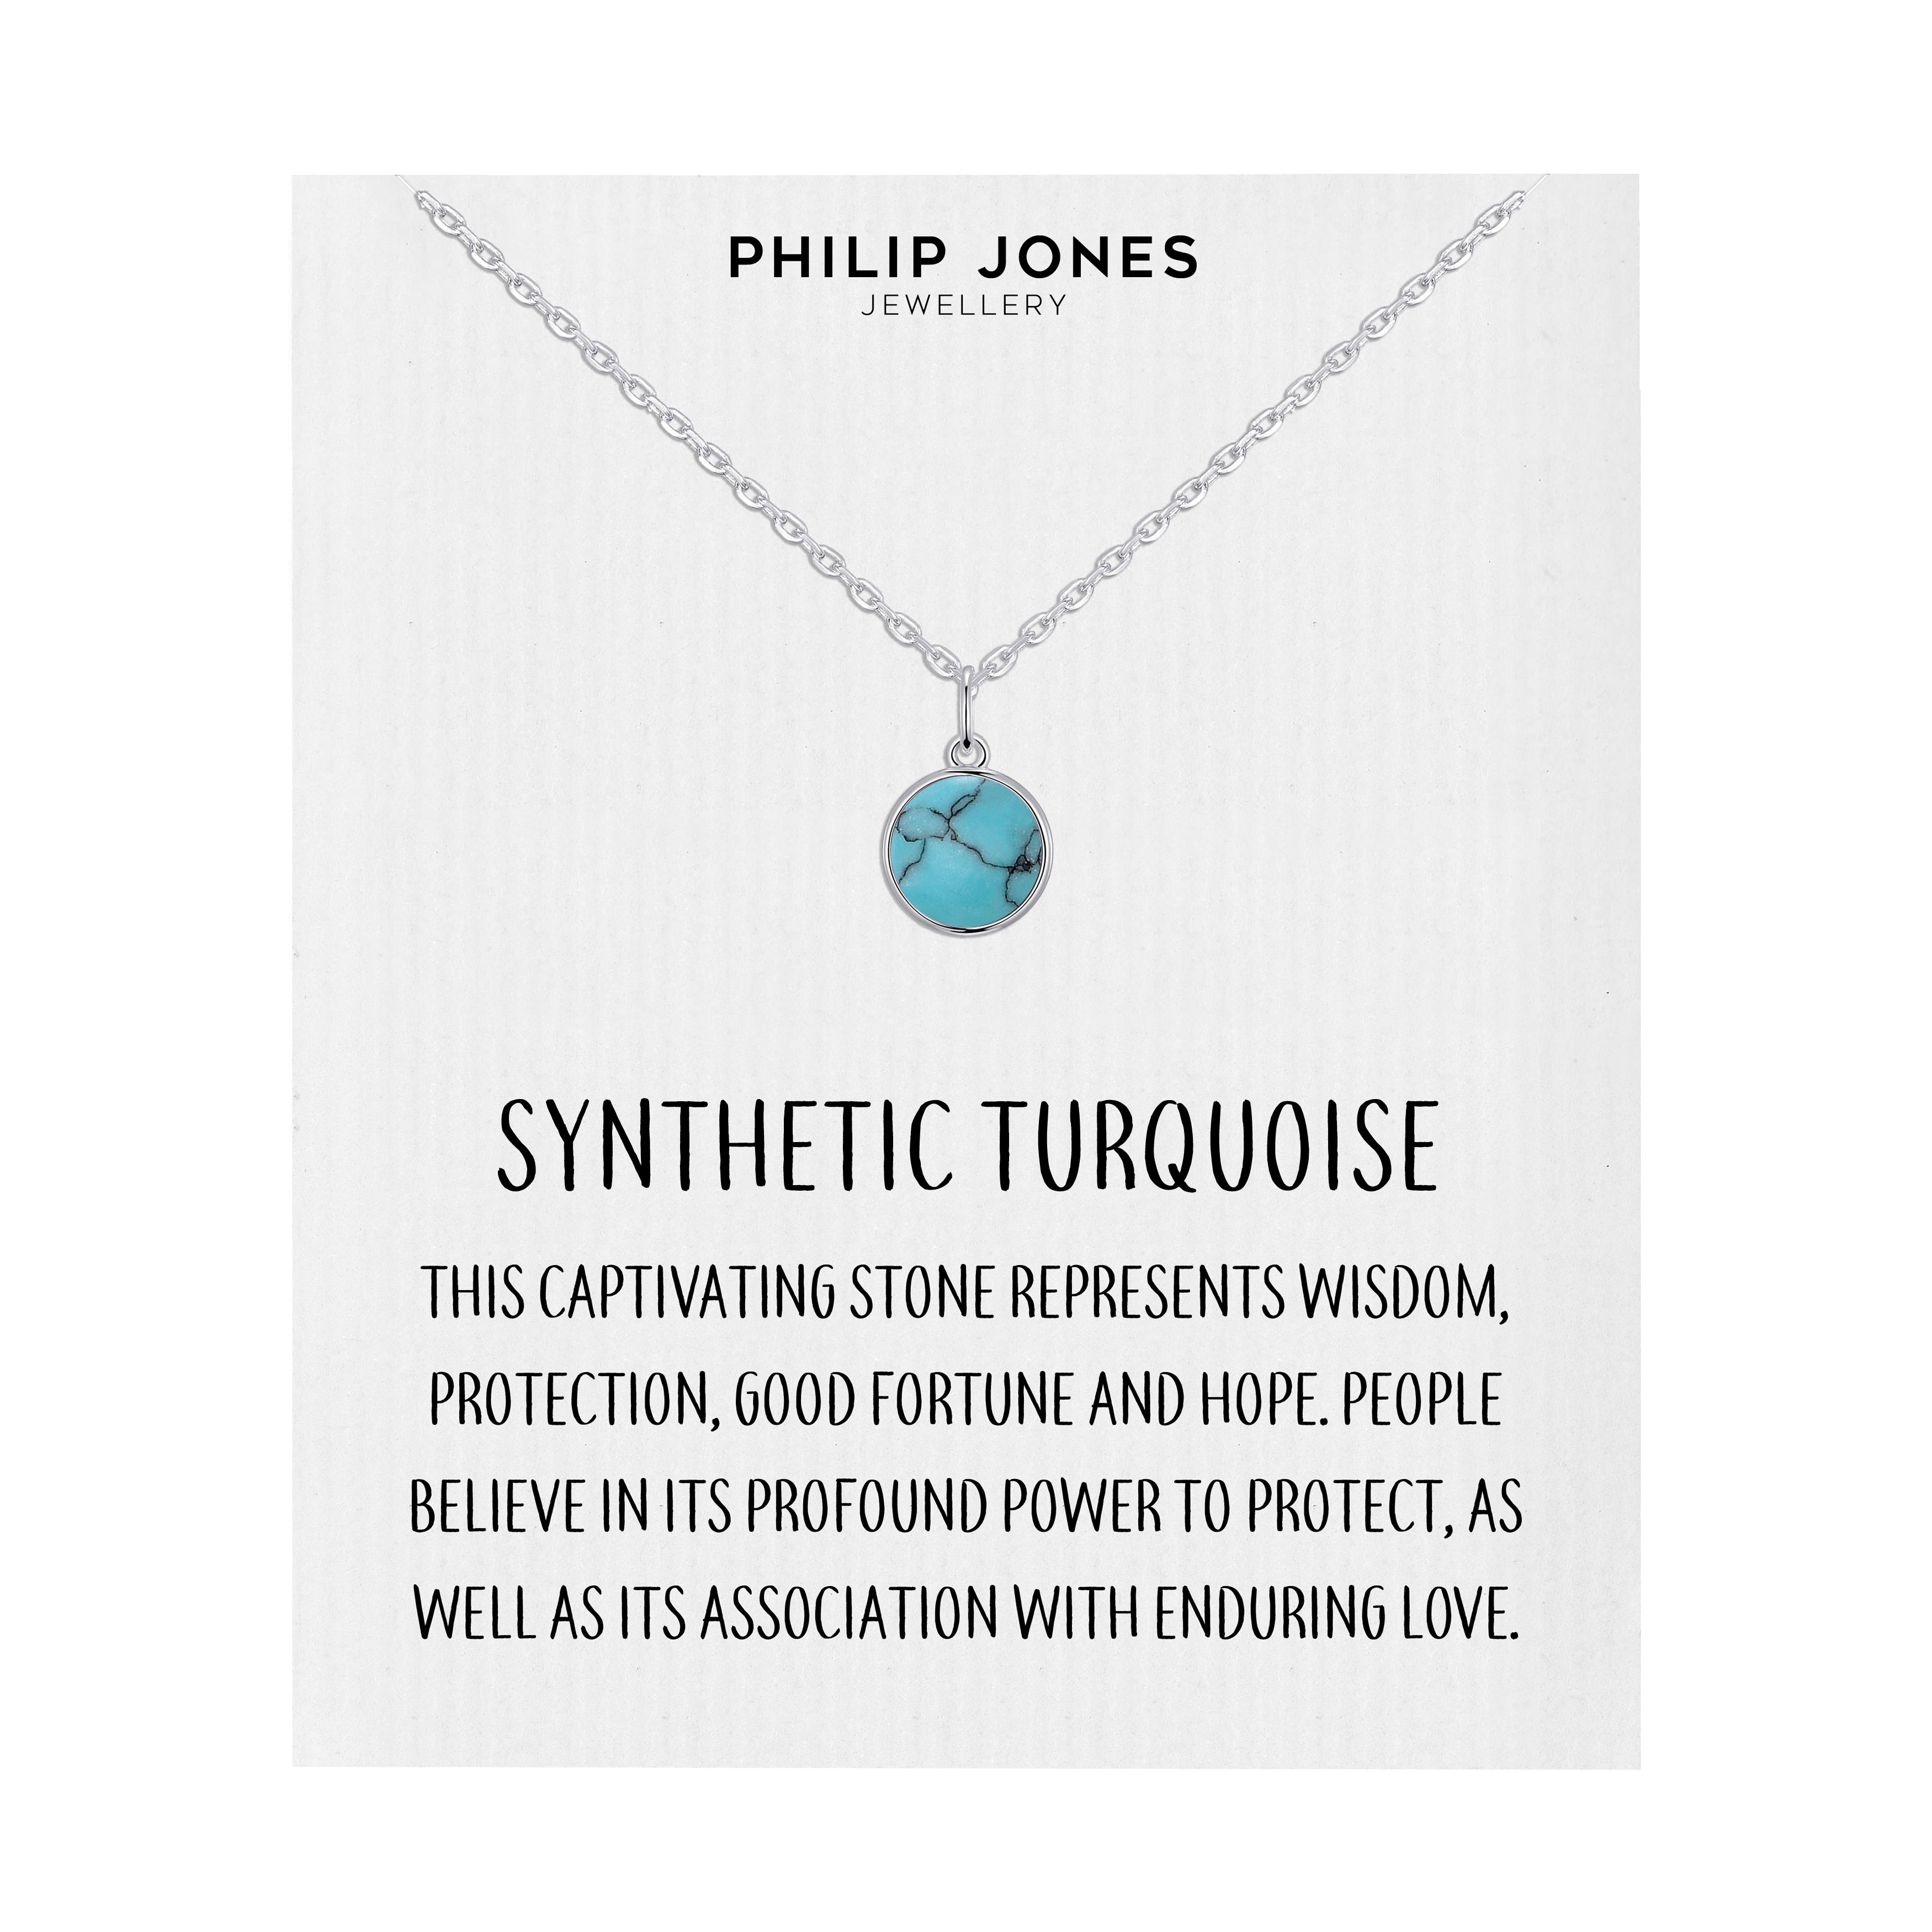 Synthetic Turquoise Necklace with Quote Card by Philip Jones Jewellery